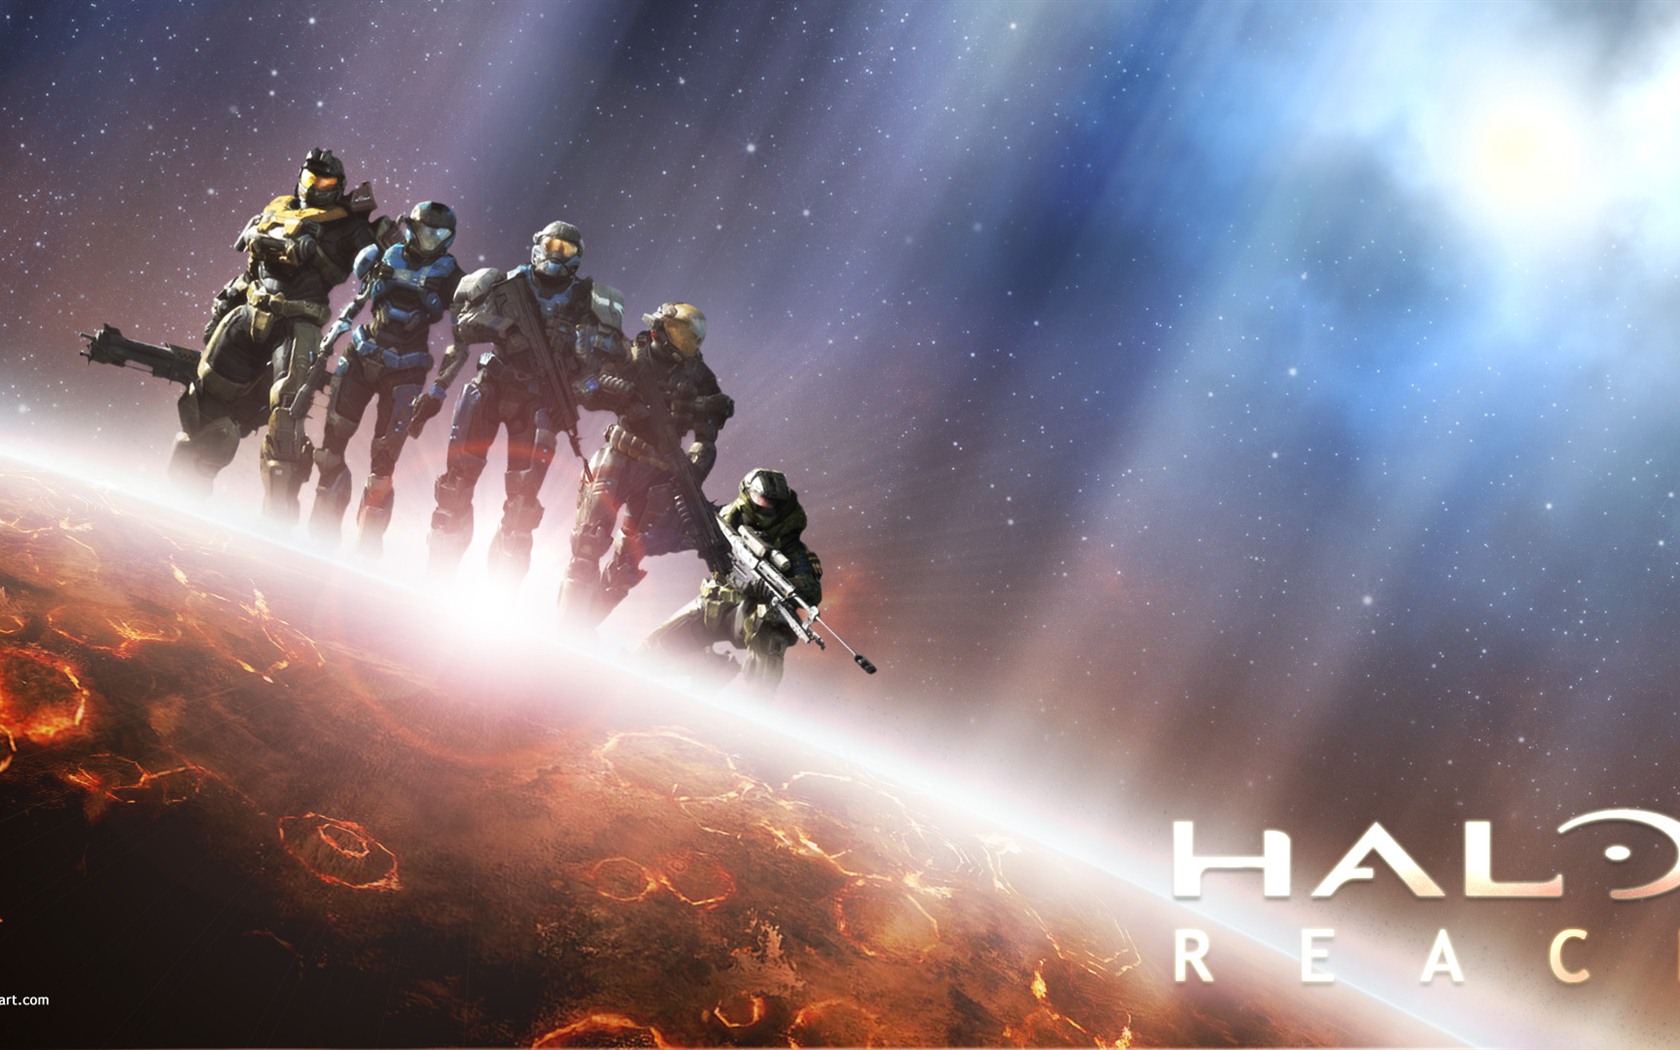 Halo game HD wallpapers #18 - 1680x1050